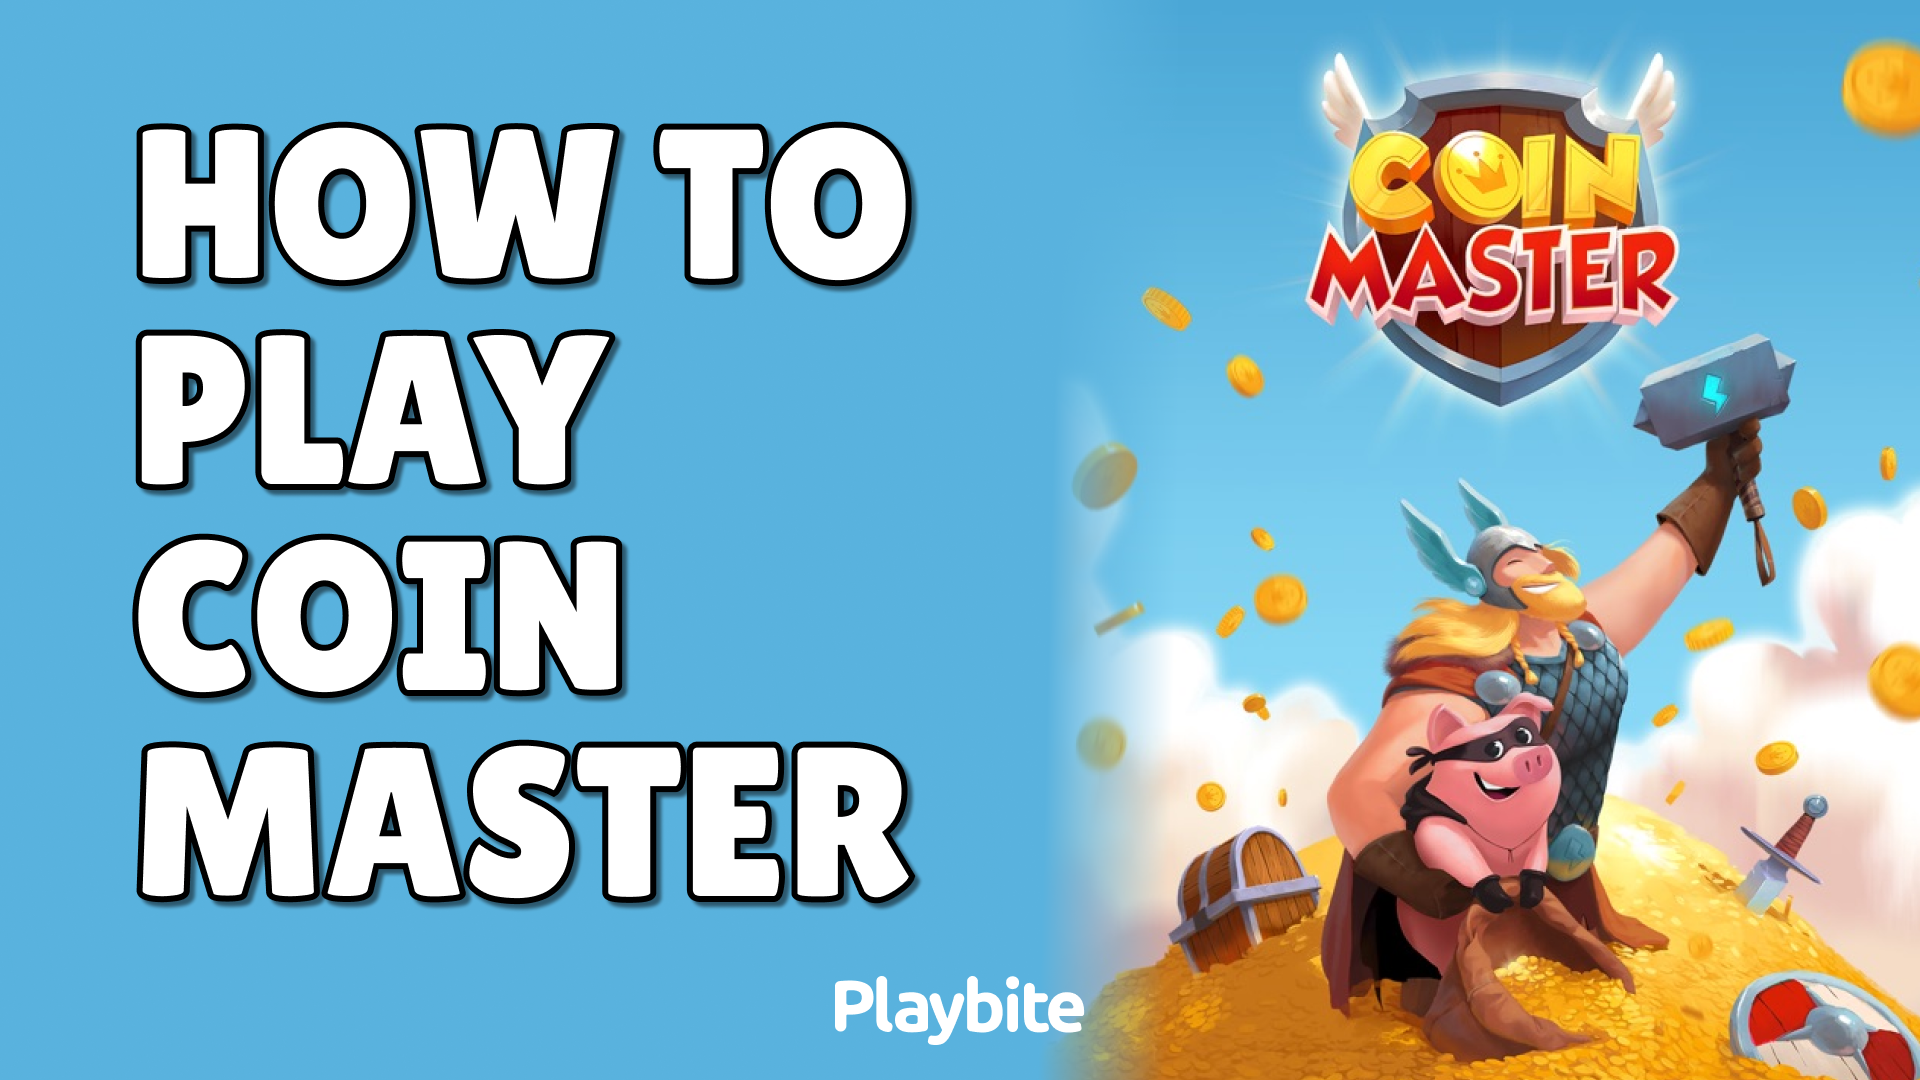 Play Coin Master, a free online game on Kongregate